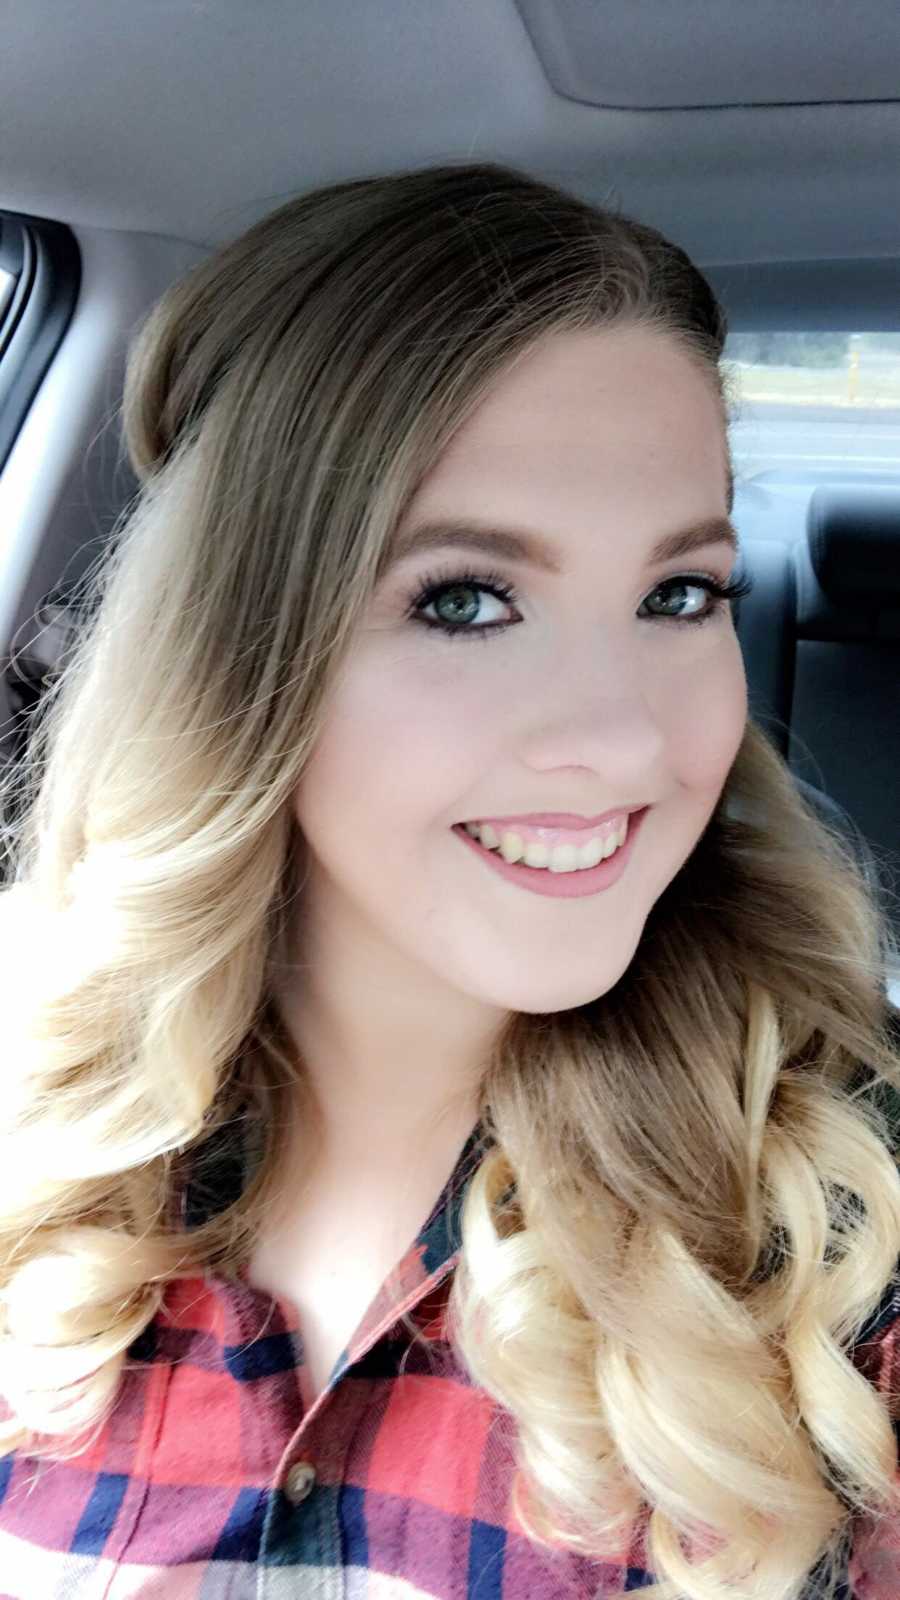 Woman with sever anxiety smiles in selfie in her car